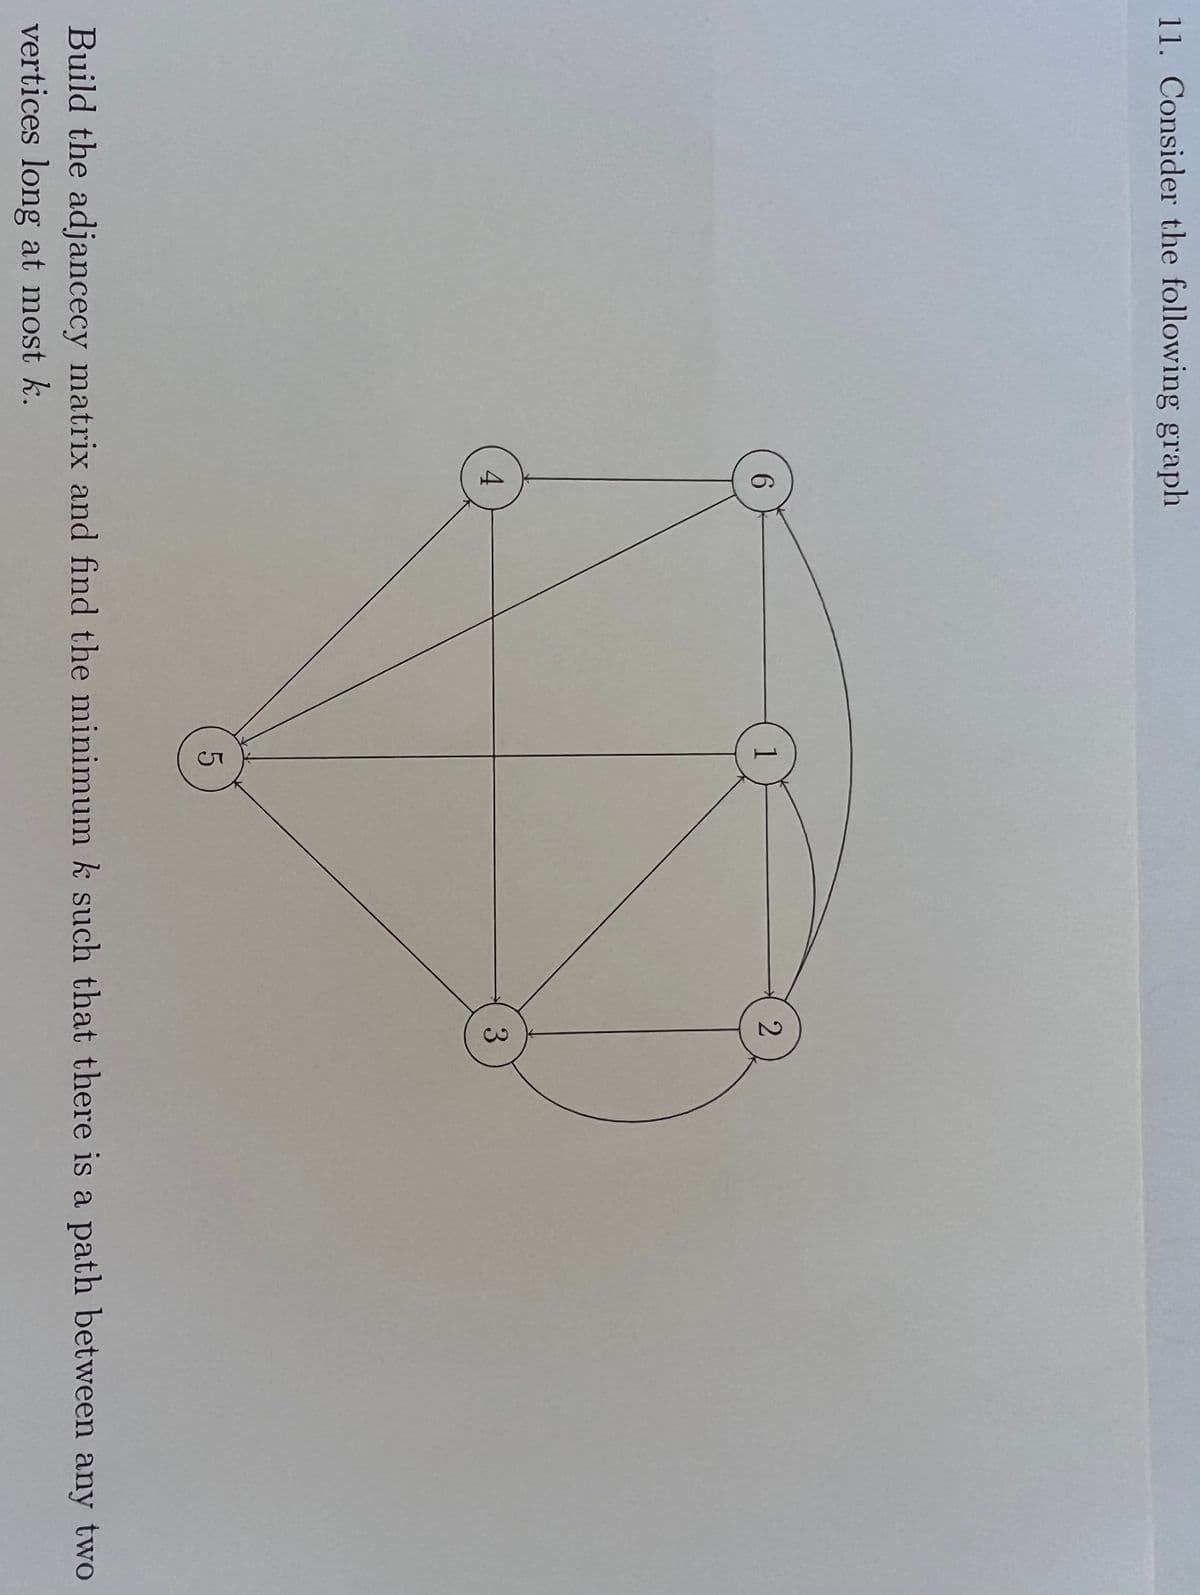 11. Consider the following graph
3
Build the adjancecy matrix and find the minimum k such that there is a path between any two
vertices long at most k.
